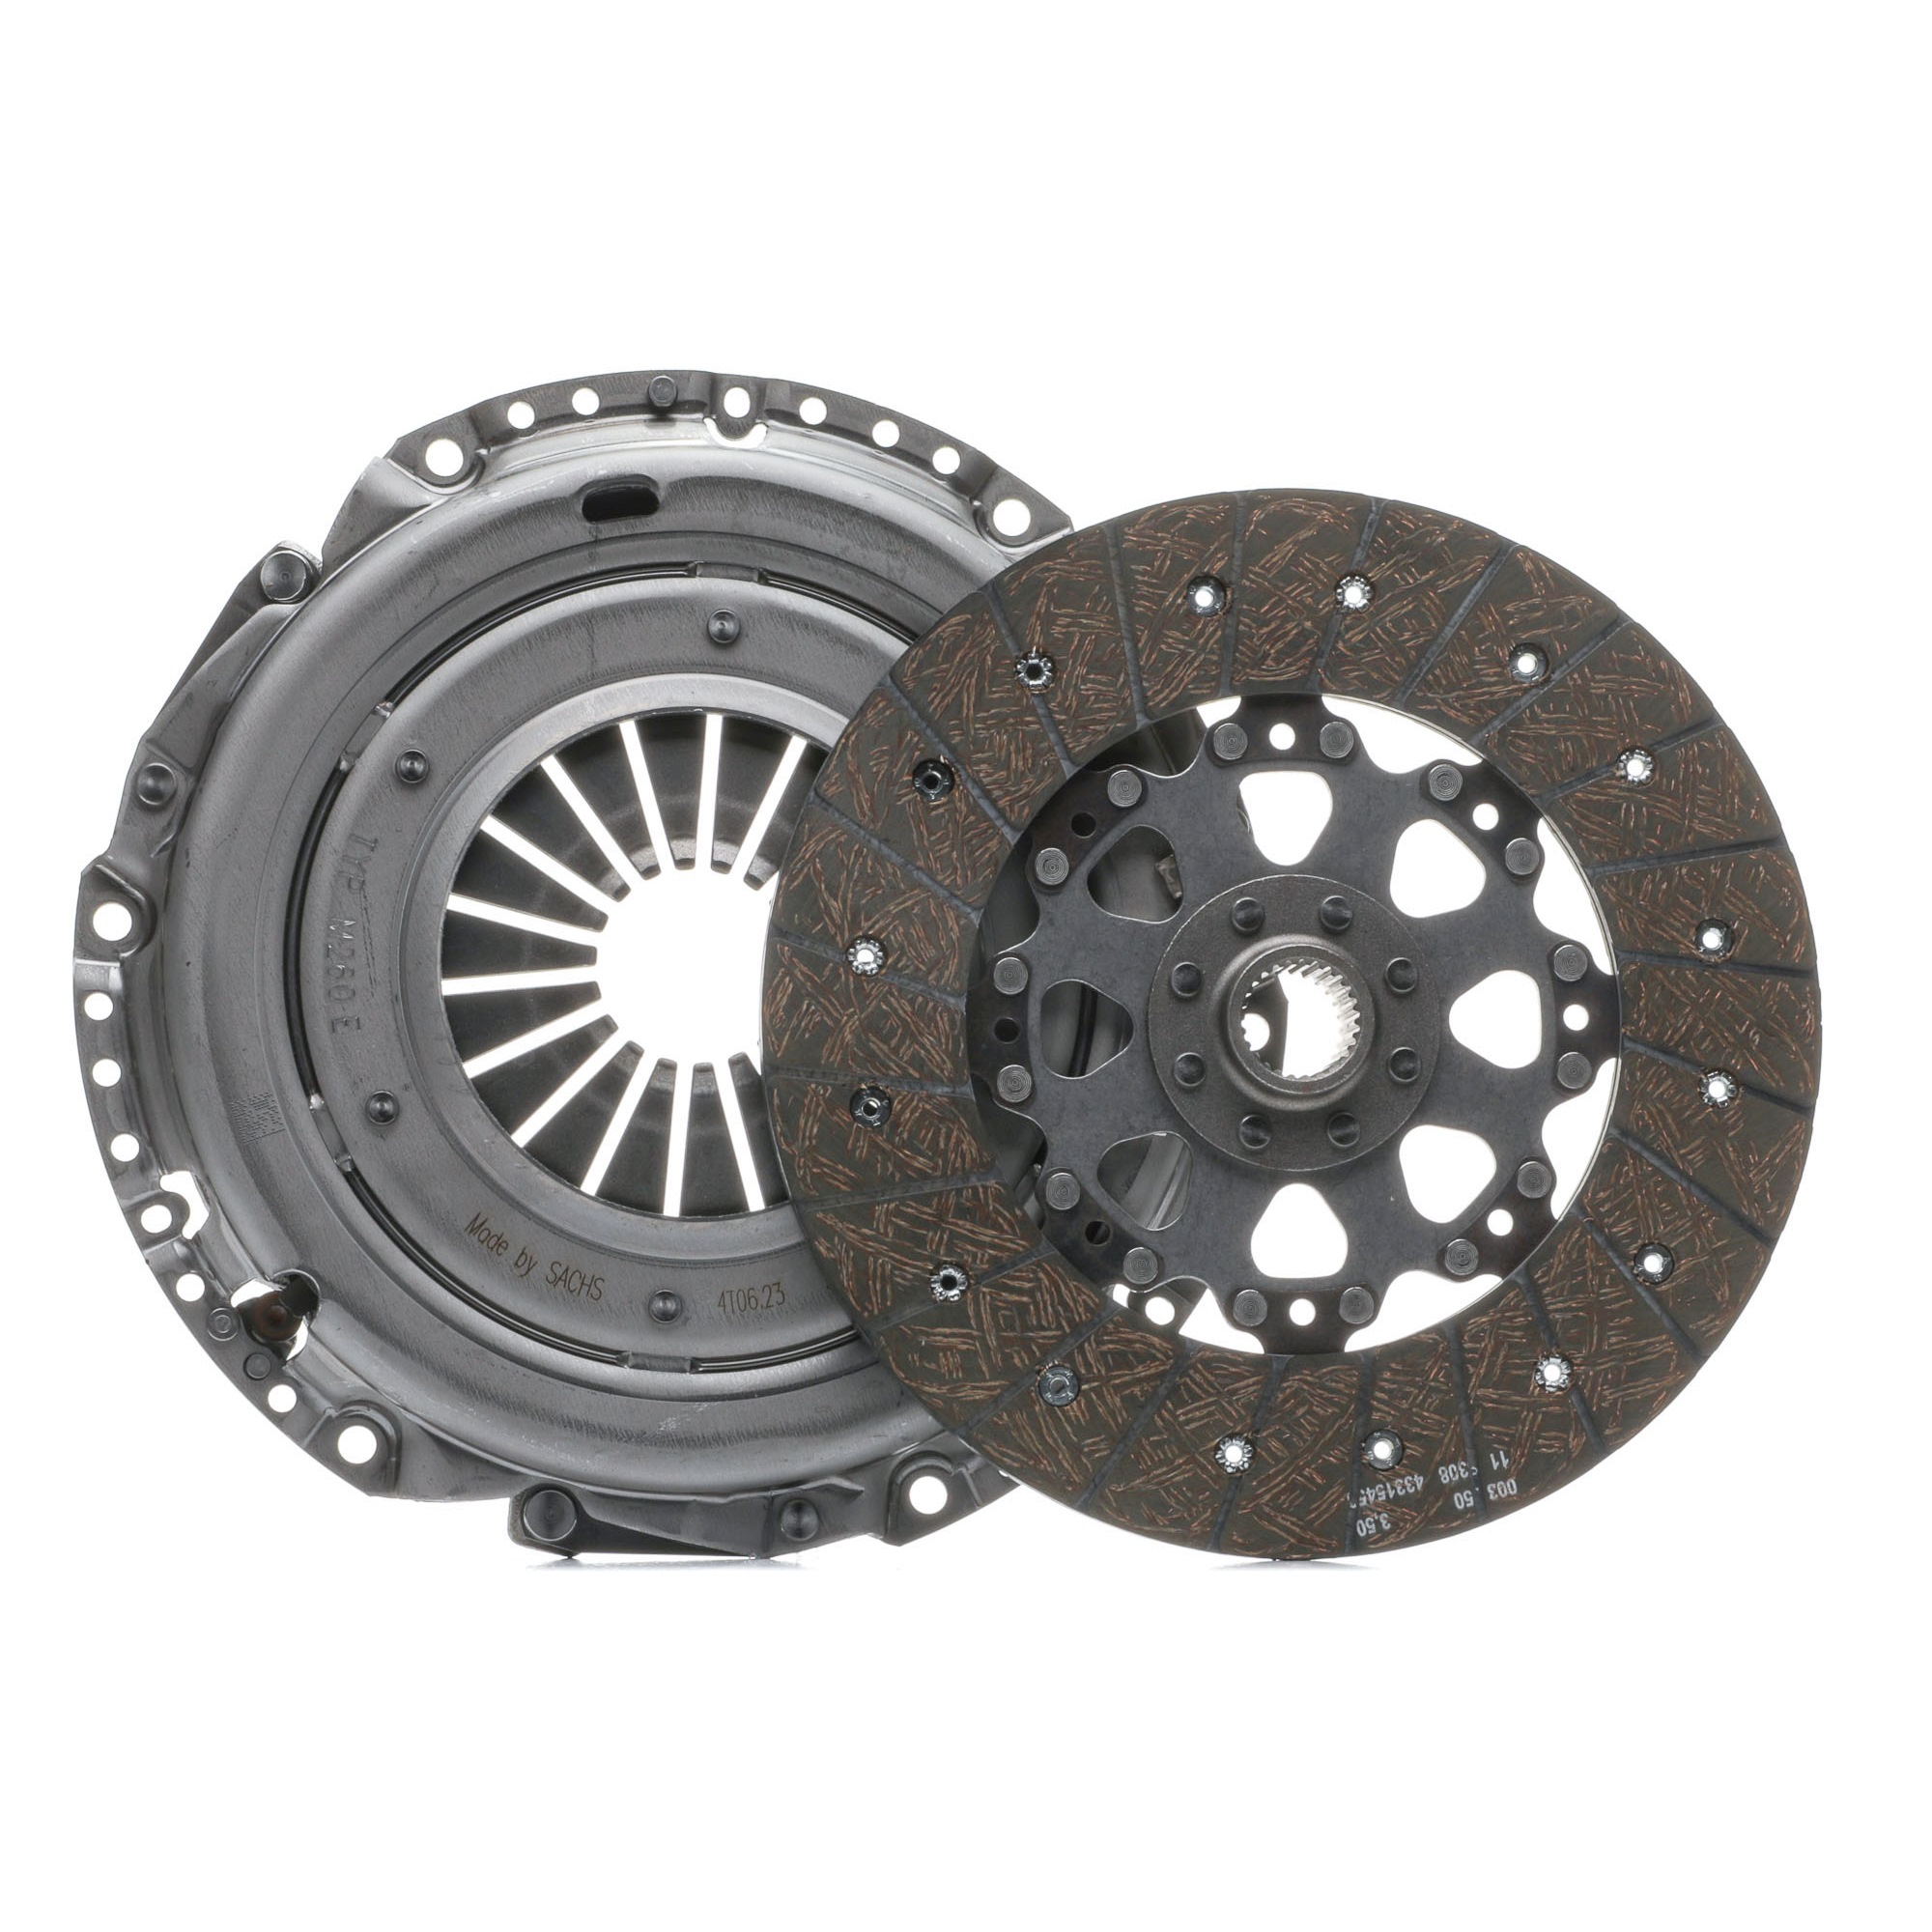 SACHS Clutch replacement kit MERCEDES-BENZ S-Class Saloon (W221) new 3000 970 142